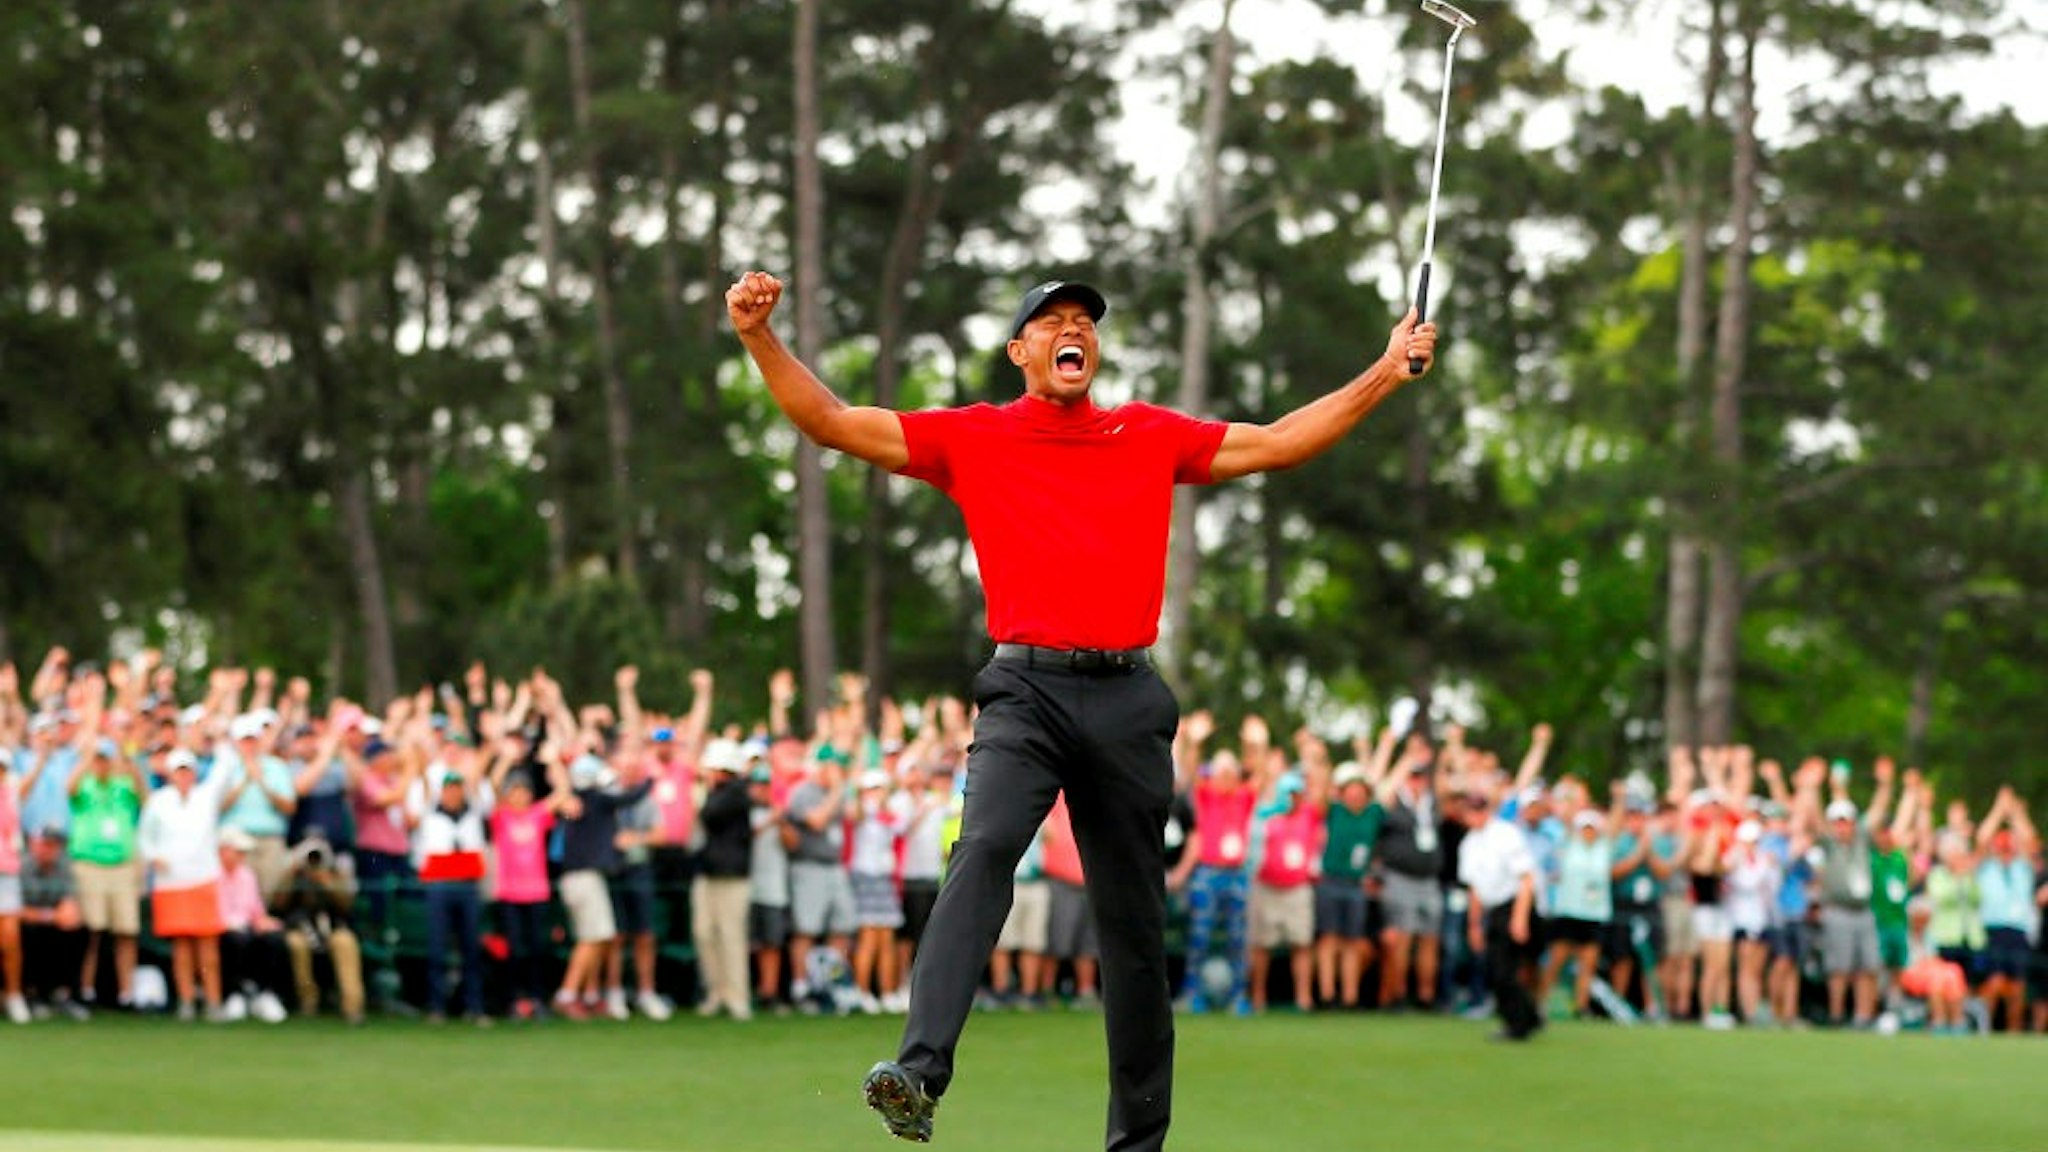 AUGUSTA, GEORGIA - APRIL 14: Tiger Woods of the United States celebrates after sinking his putt on the 18th green to win during the final round of the Masters at Augusta National Golf Club on April 14, 2019 in Augusta, Georgia. (Photo by